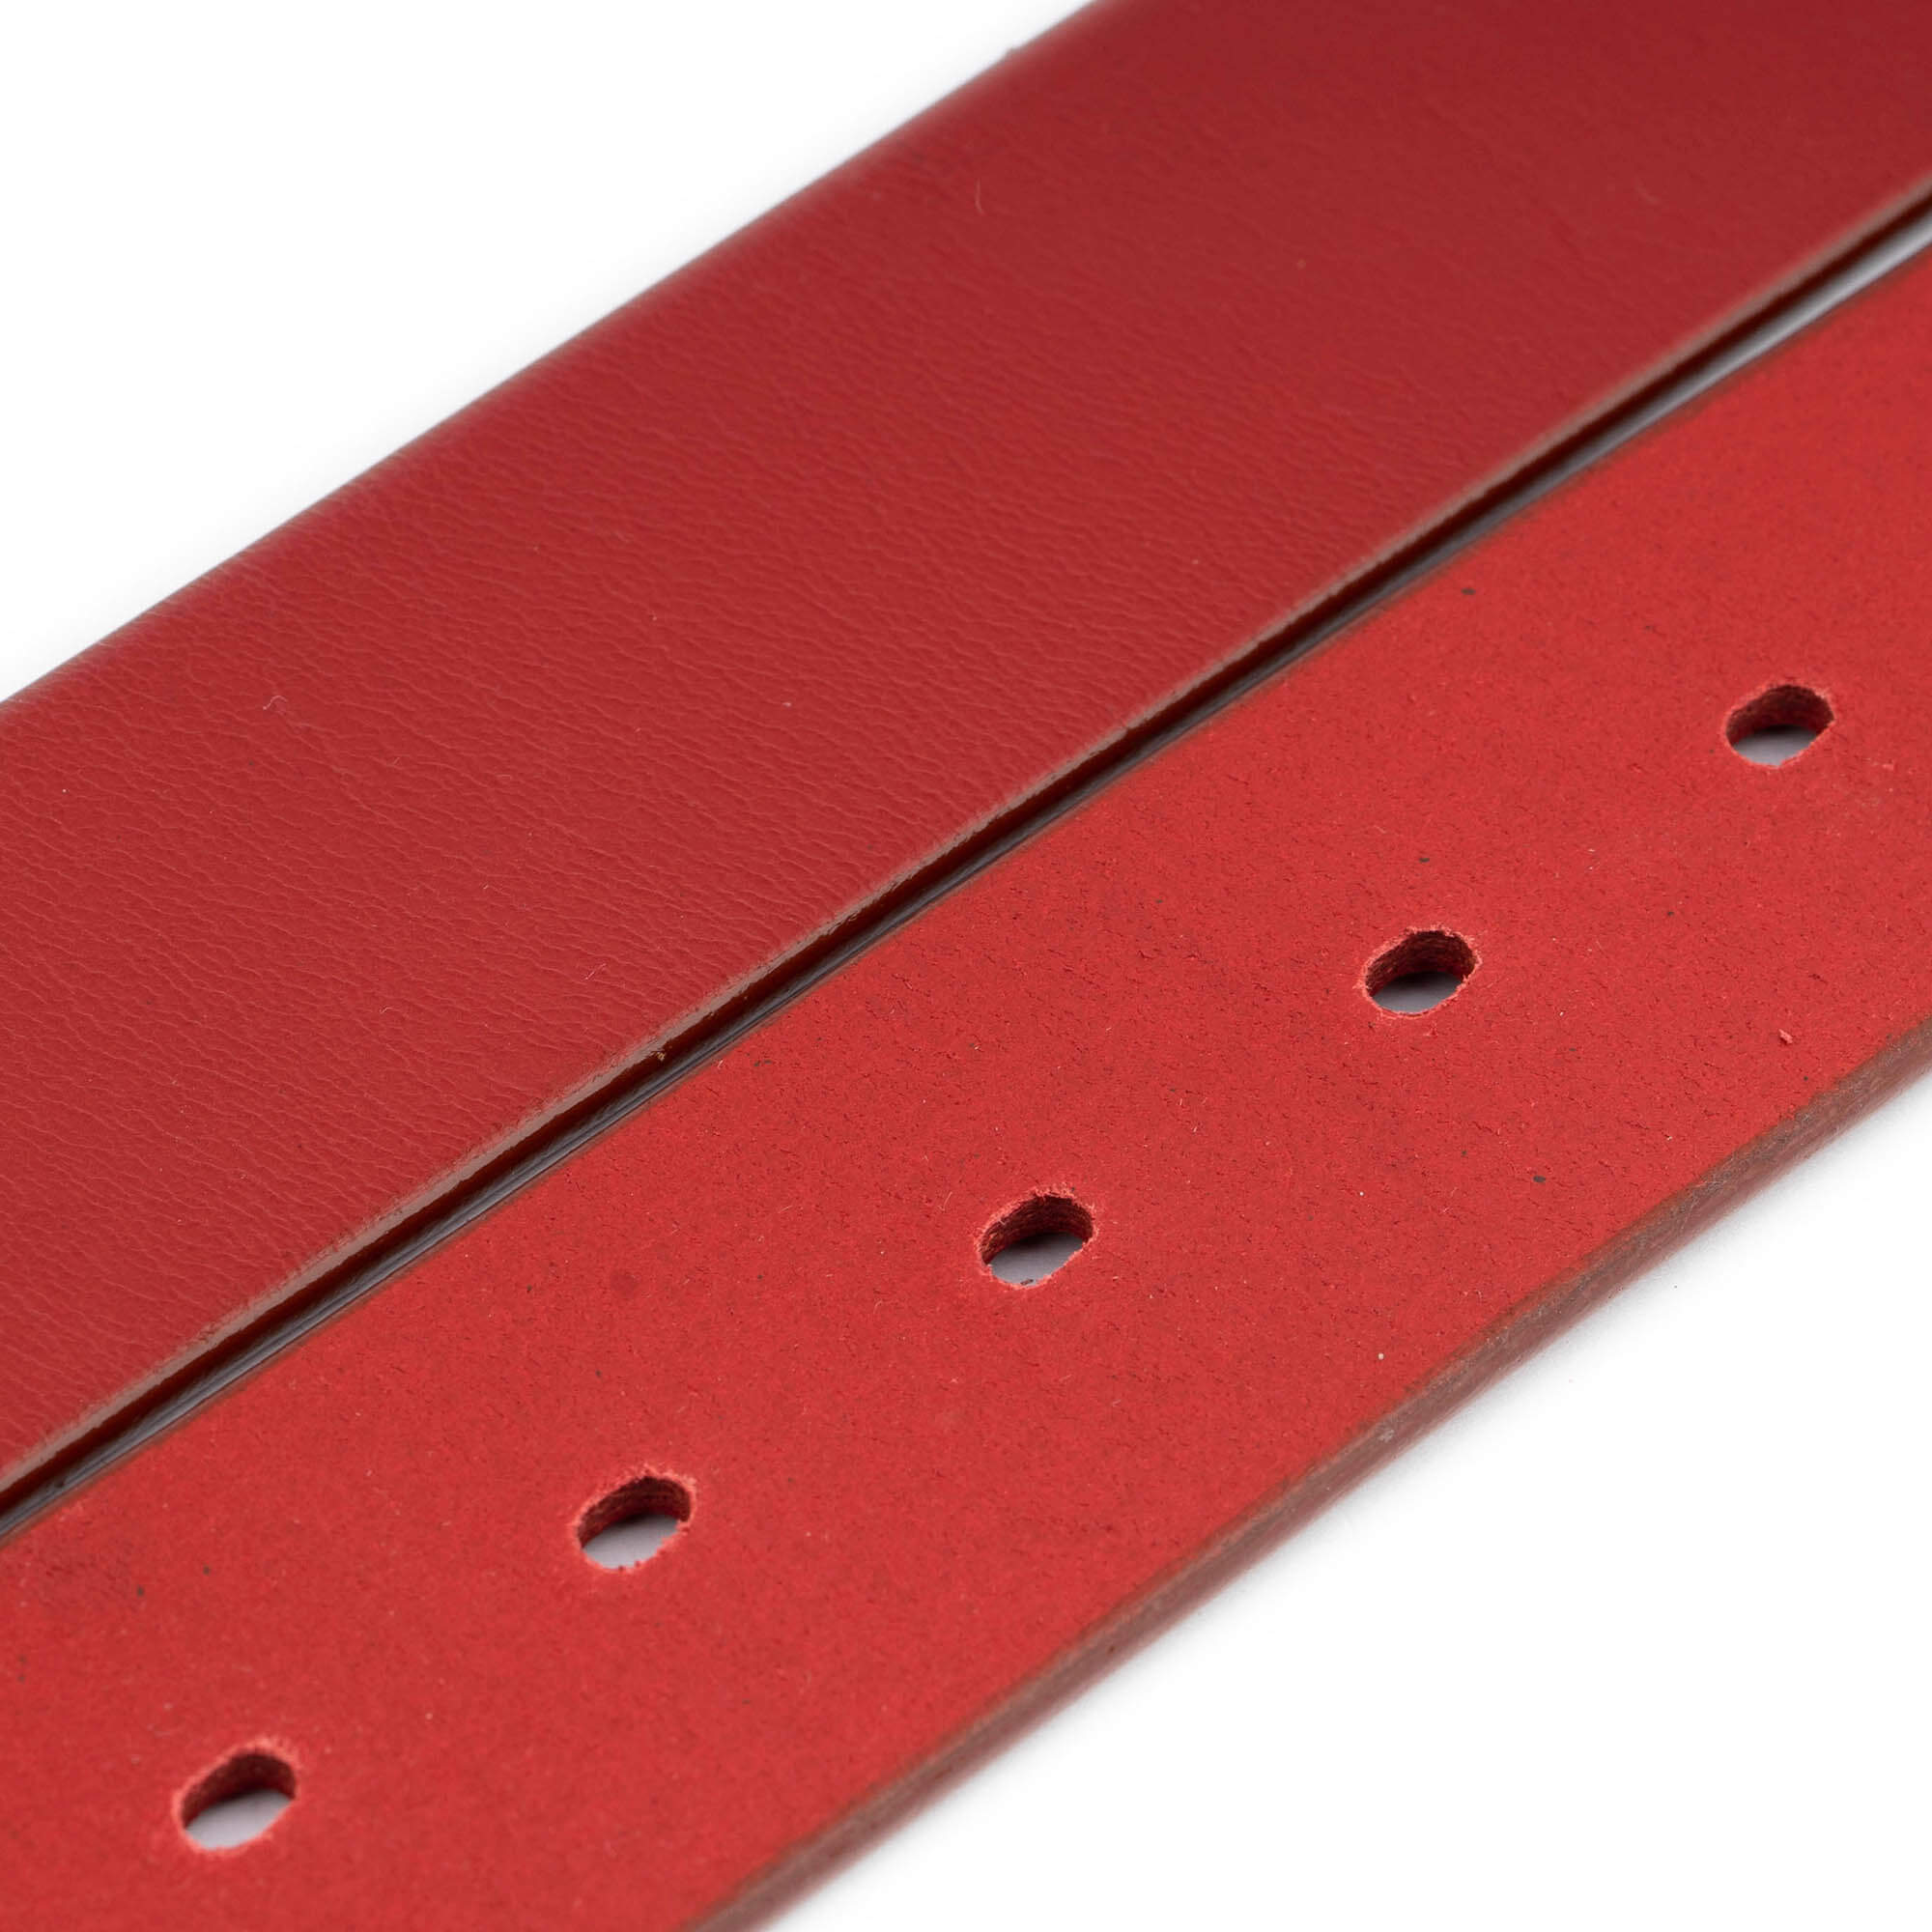 Red Belt Strap for Buckles Replacement - Real Leather 1 1/2 inch 34 / 85 cm - Red